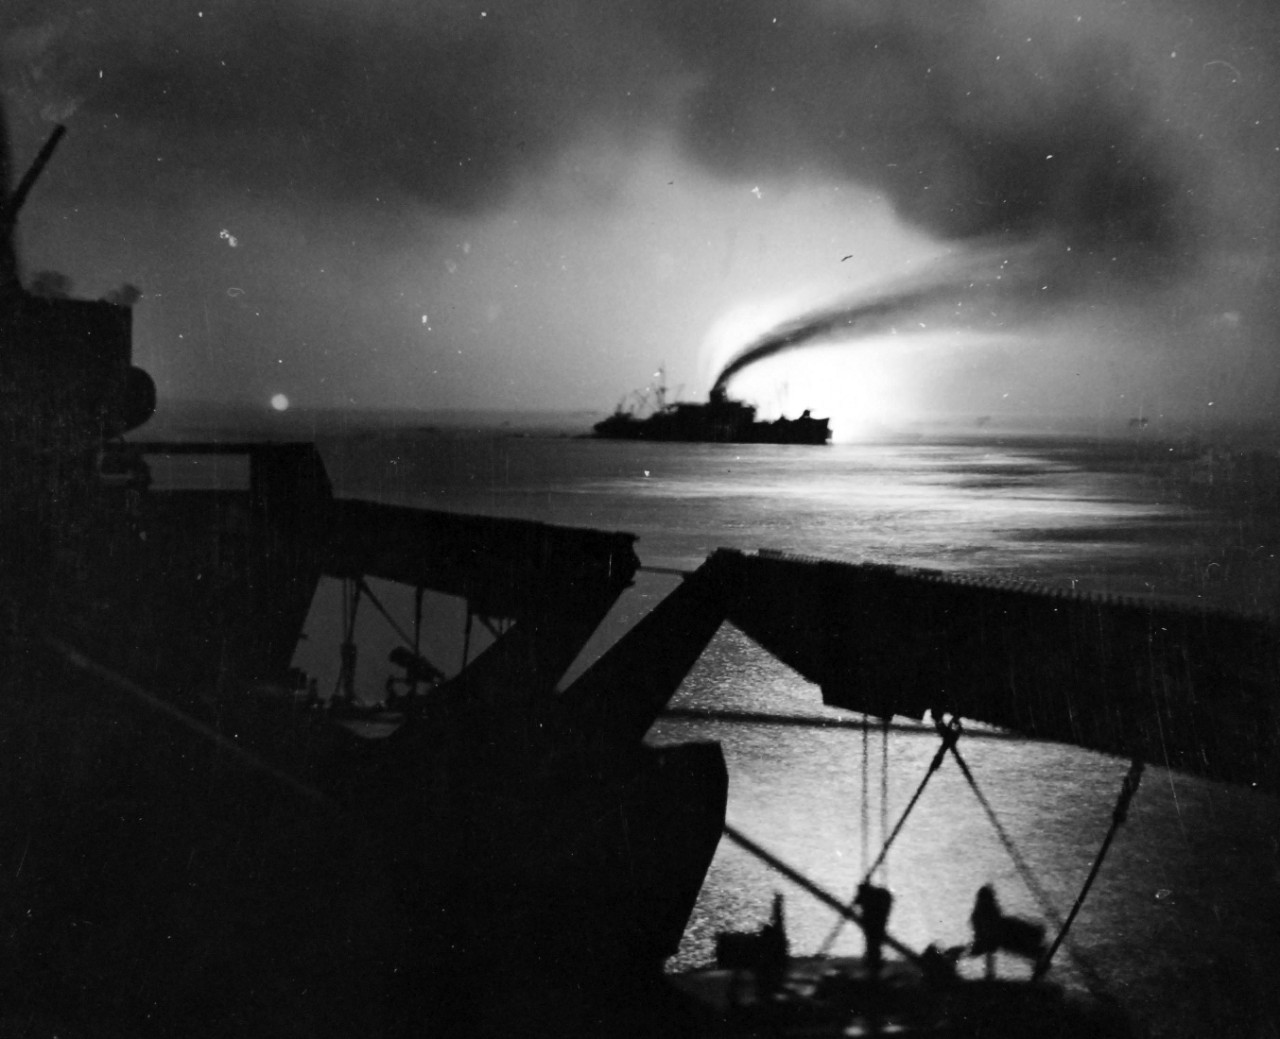 80-G-87394:  Operation Avalanche, September 1943.  An LCI afire illuminates the entire convoy in Salerno Bay, D-Day.  Photograph released September 12, 1943.     U.S. Navy photograph, now in the collections of the National Archives.  (2017/04/04).